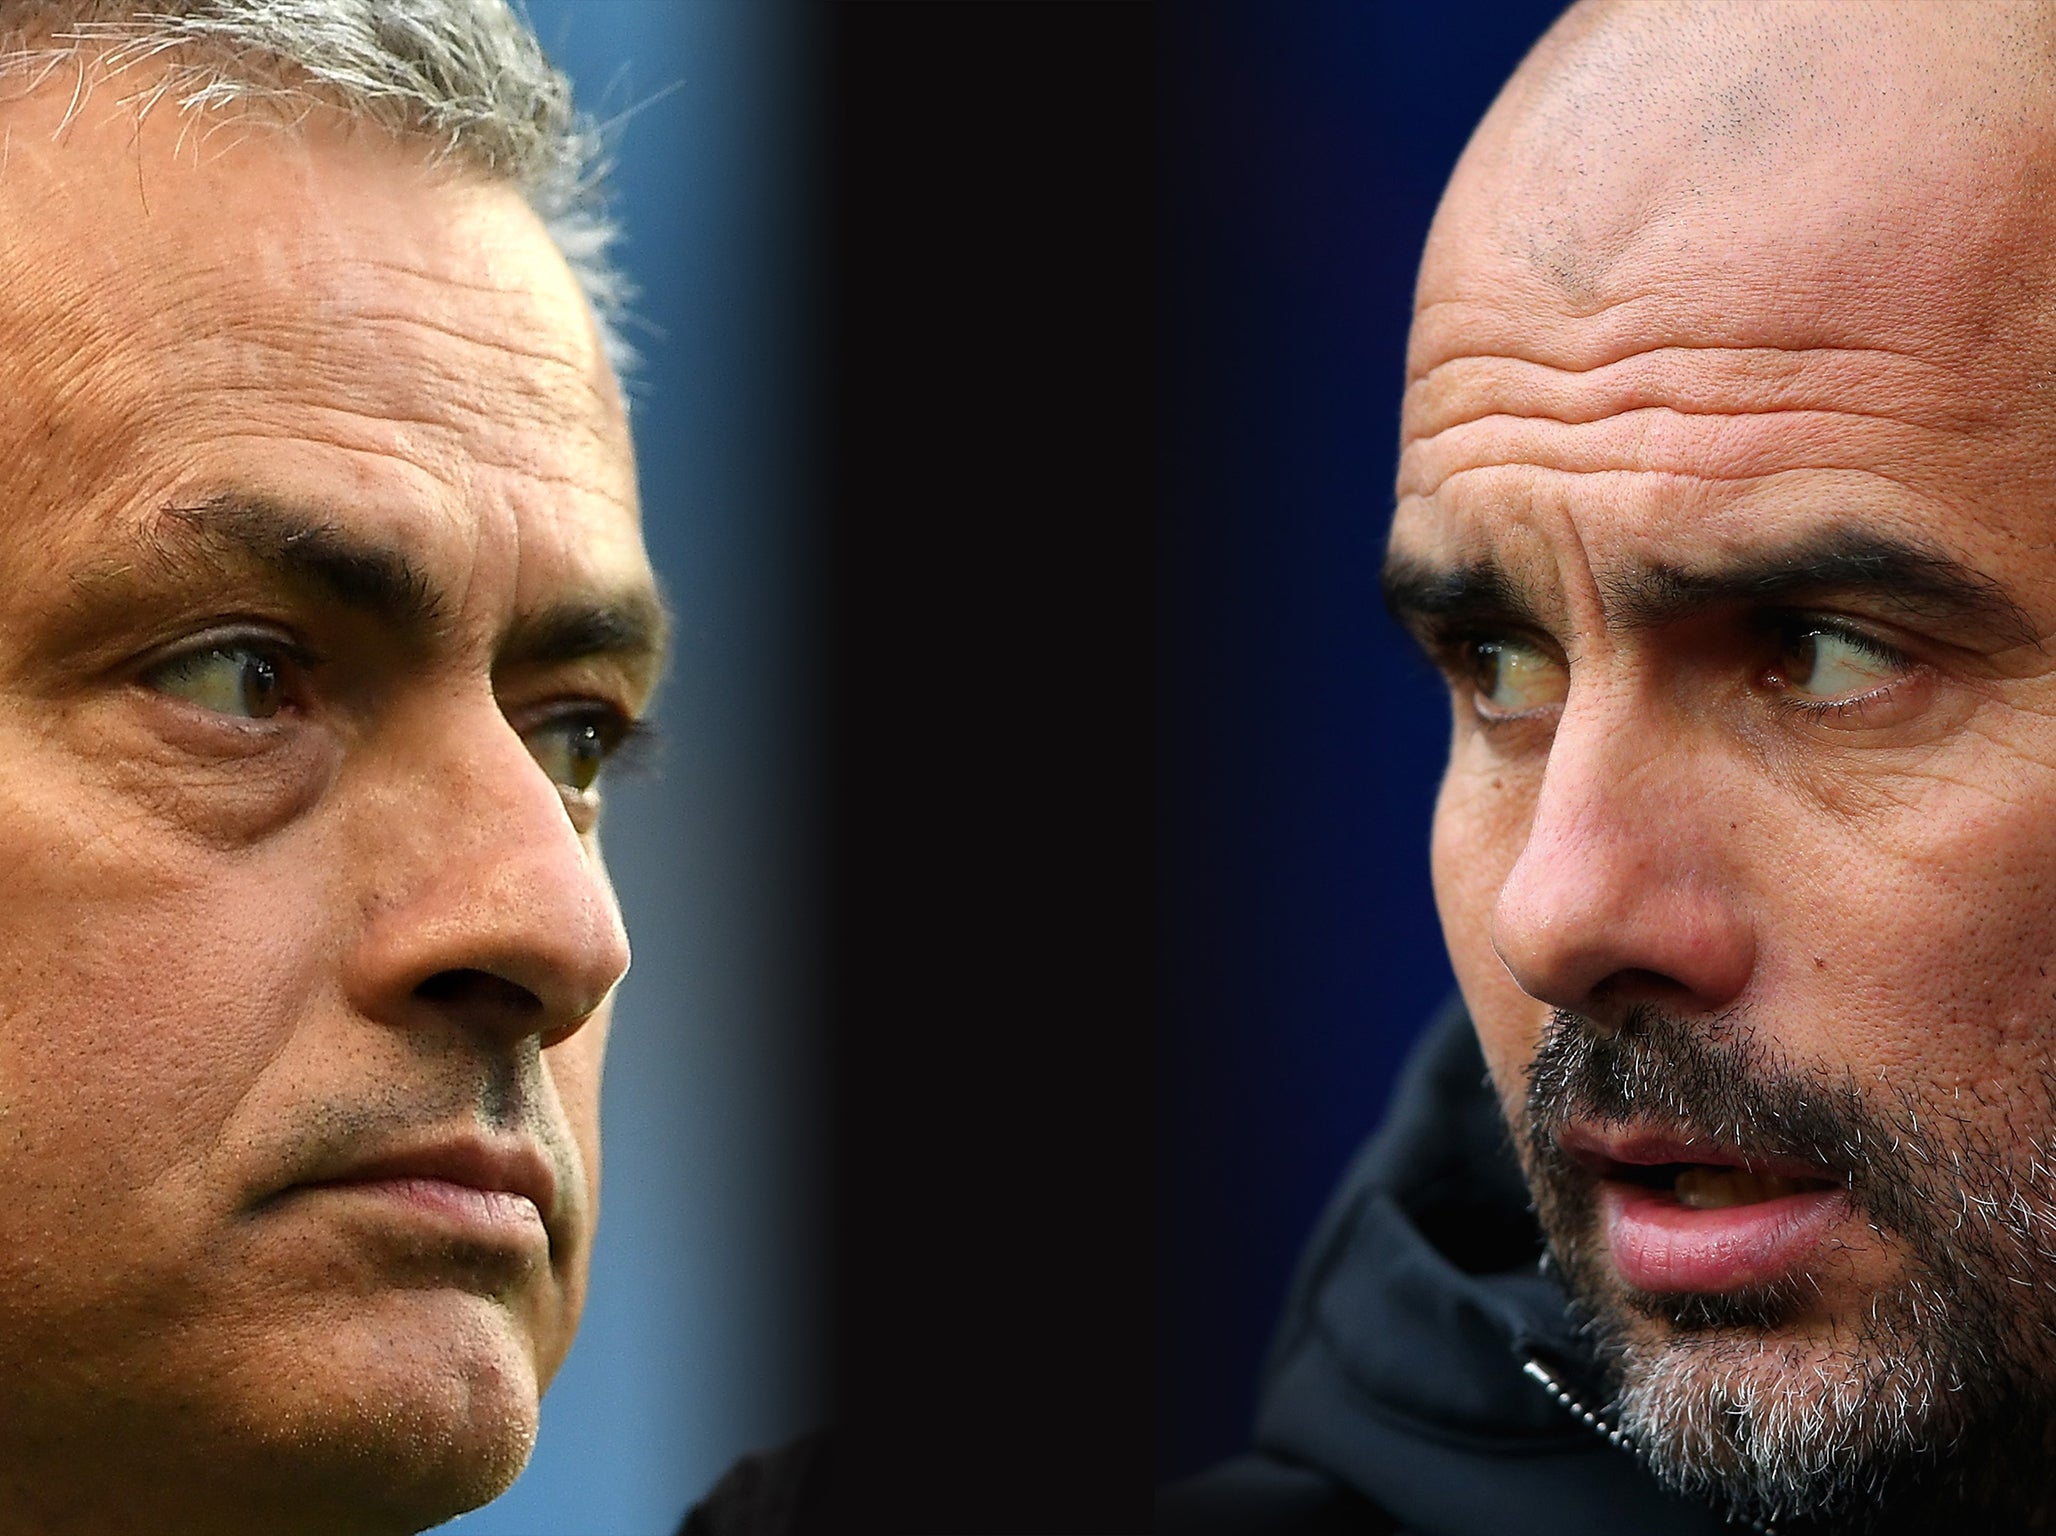 Manchester United vs Manchester City live: What time is it, where can I watch, latest team news, line-ups, odds